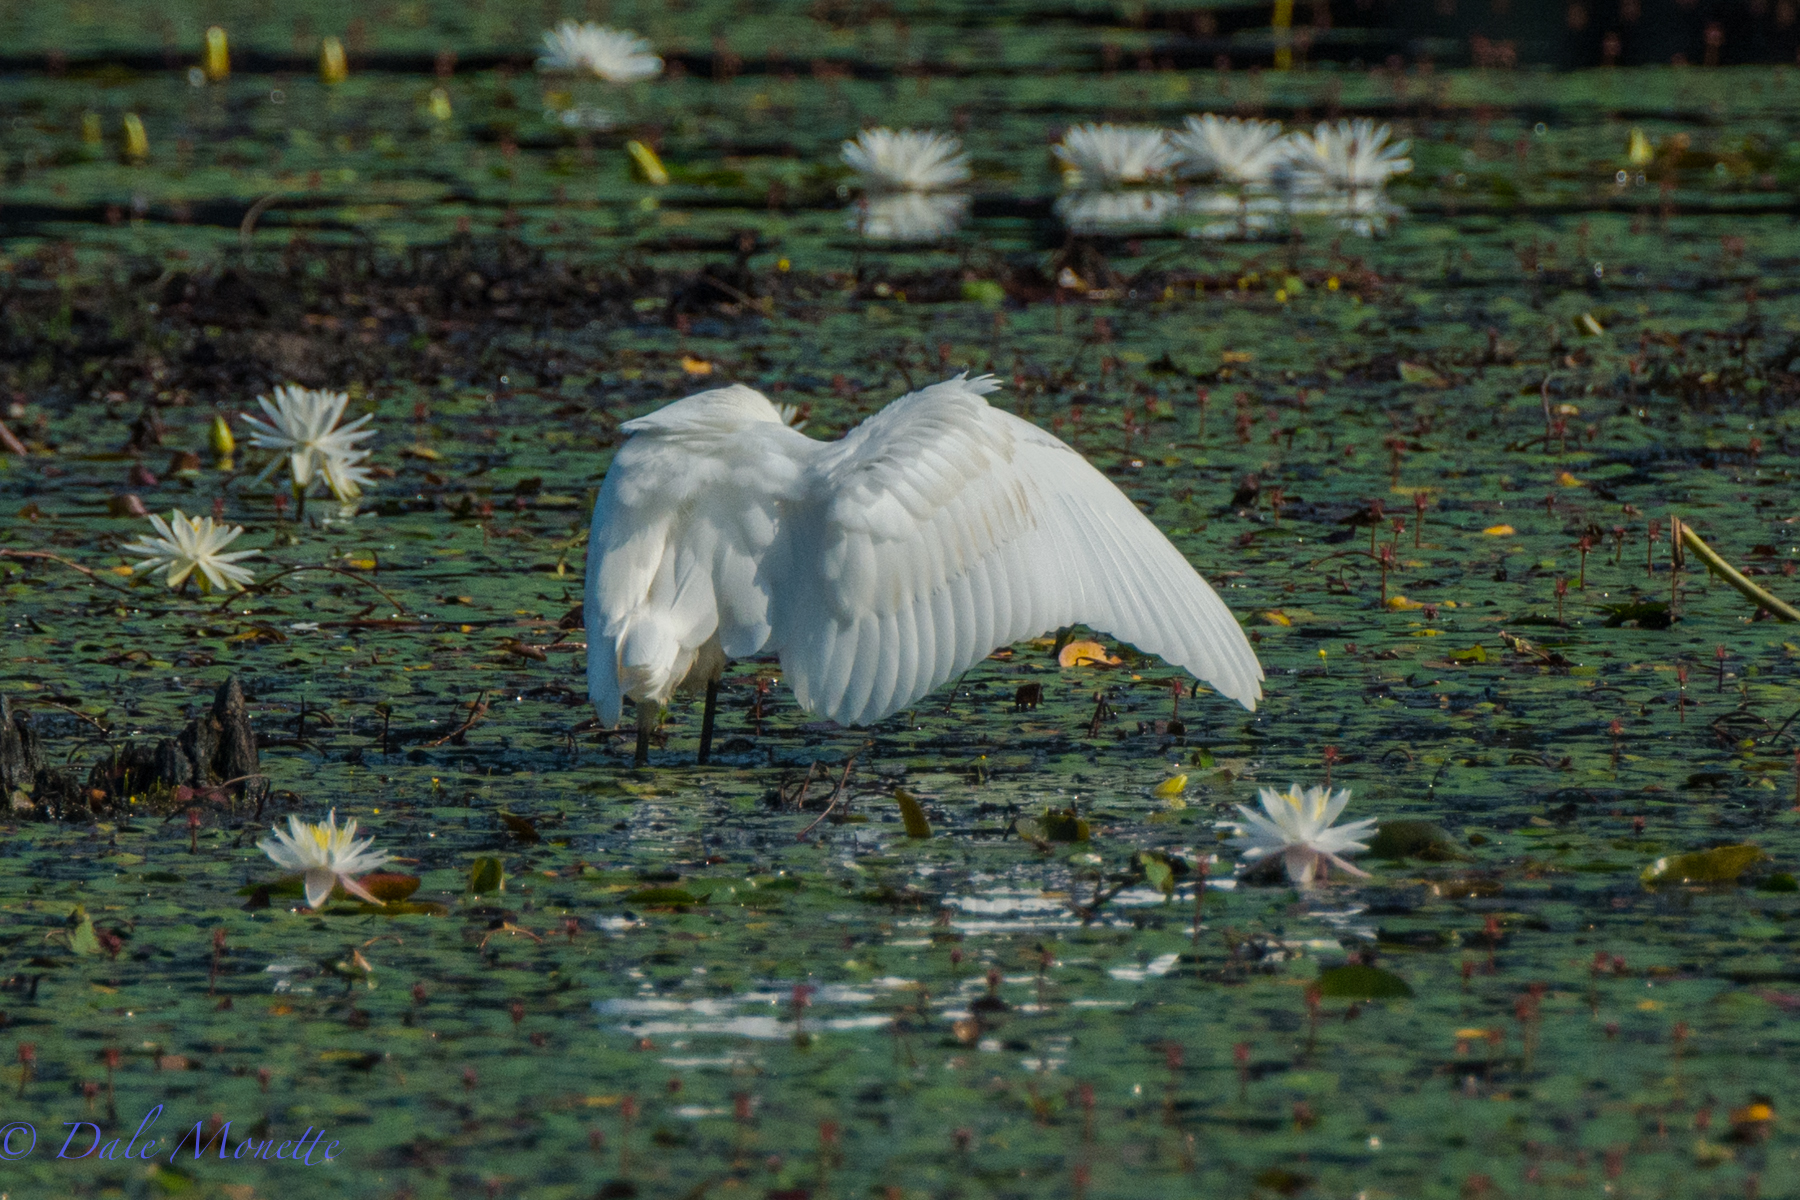   A great egret stretches his wings after preening. &nbsp; 8/18/15     